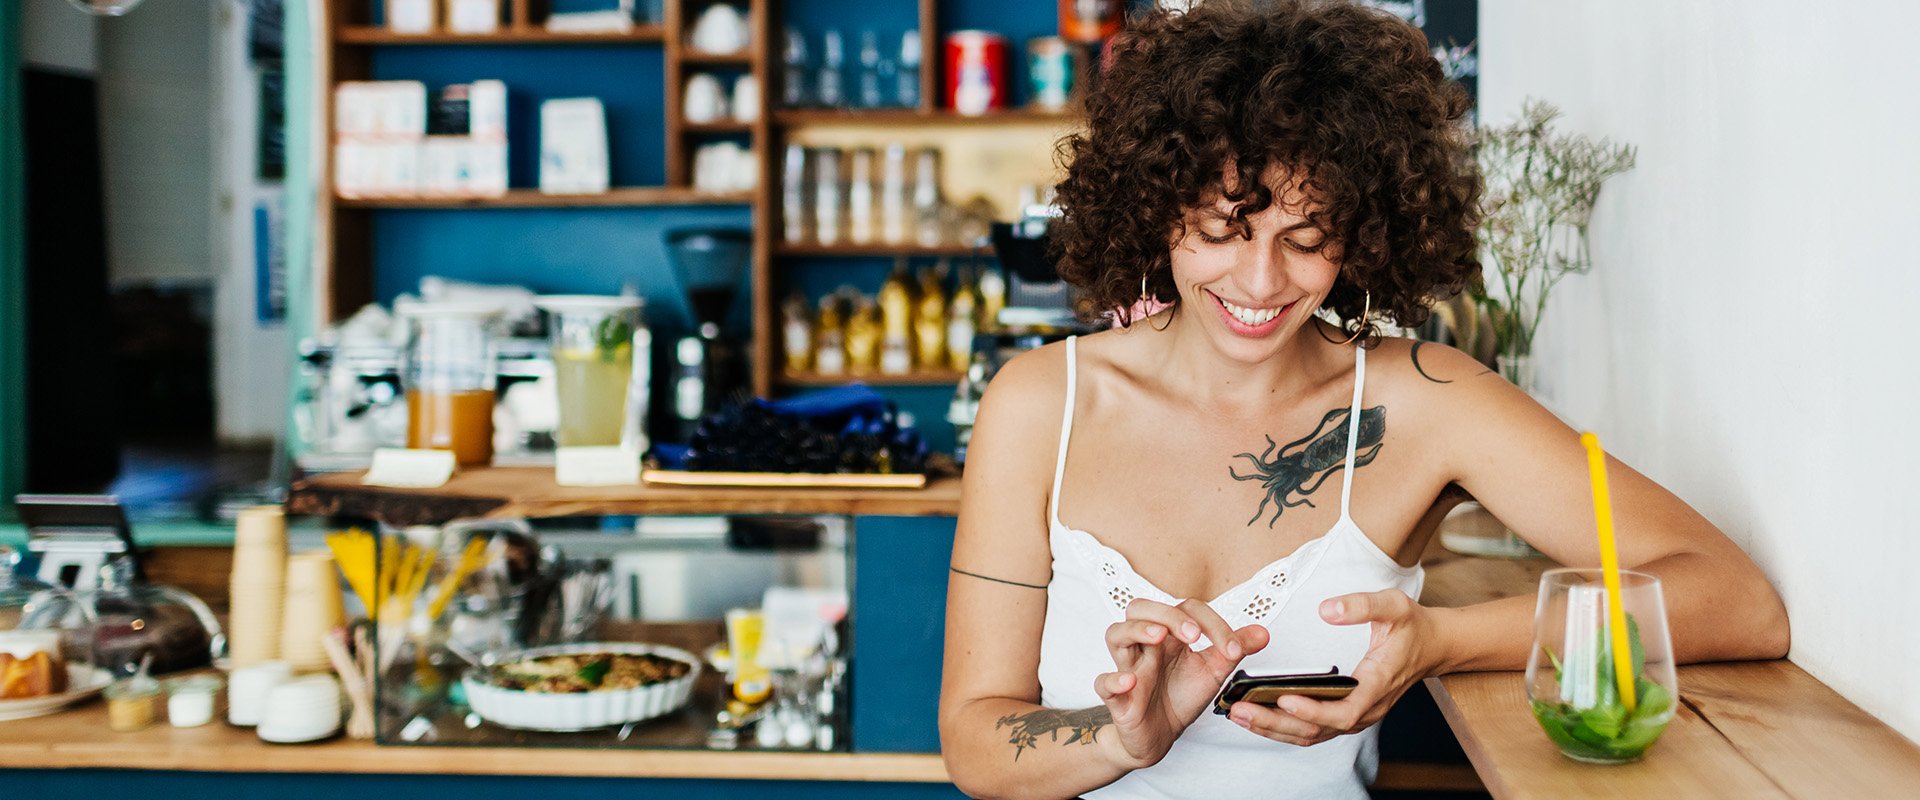 Woman on cell phone in coffee smiles as a symbol for meeting people online